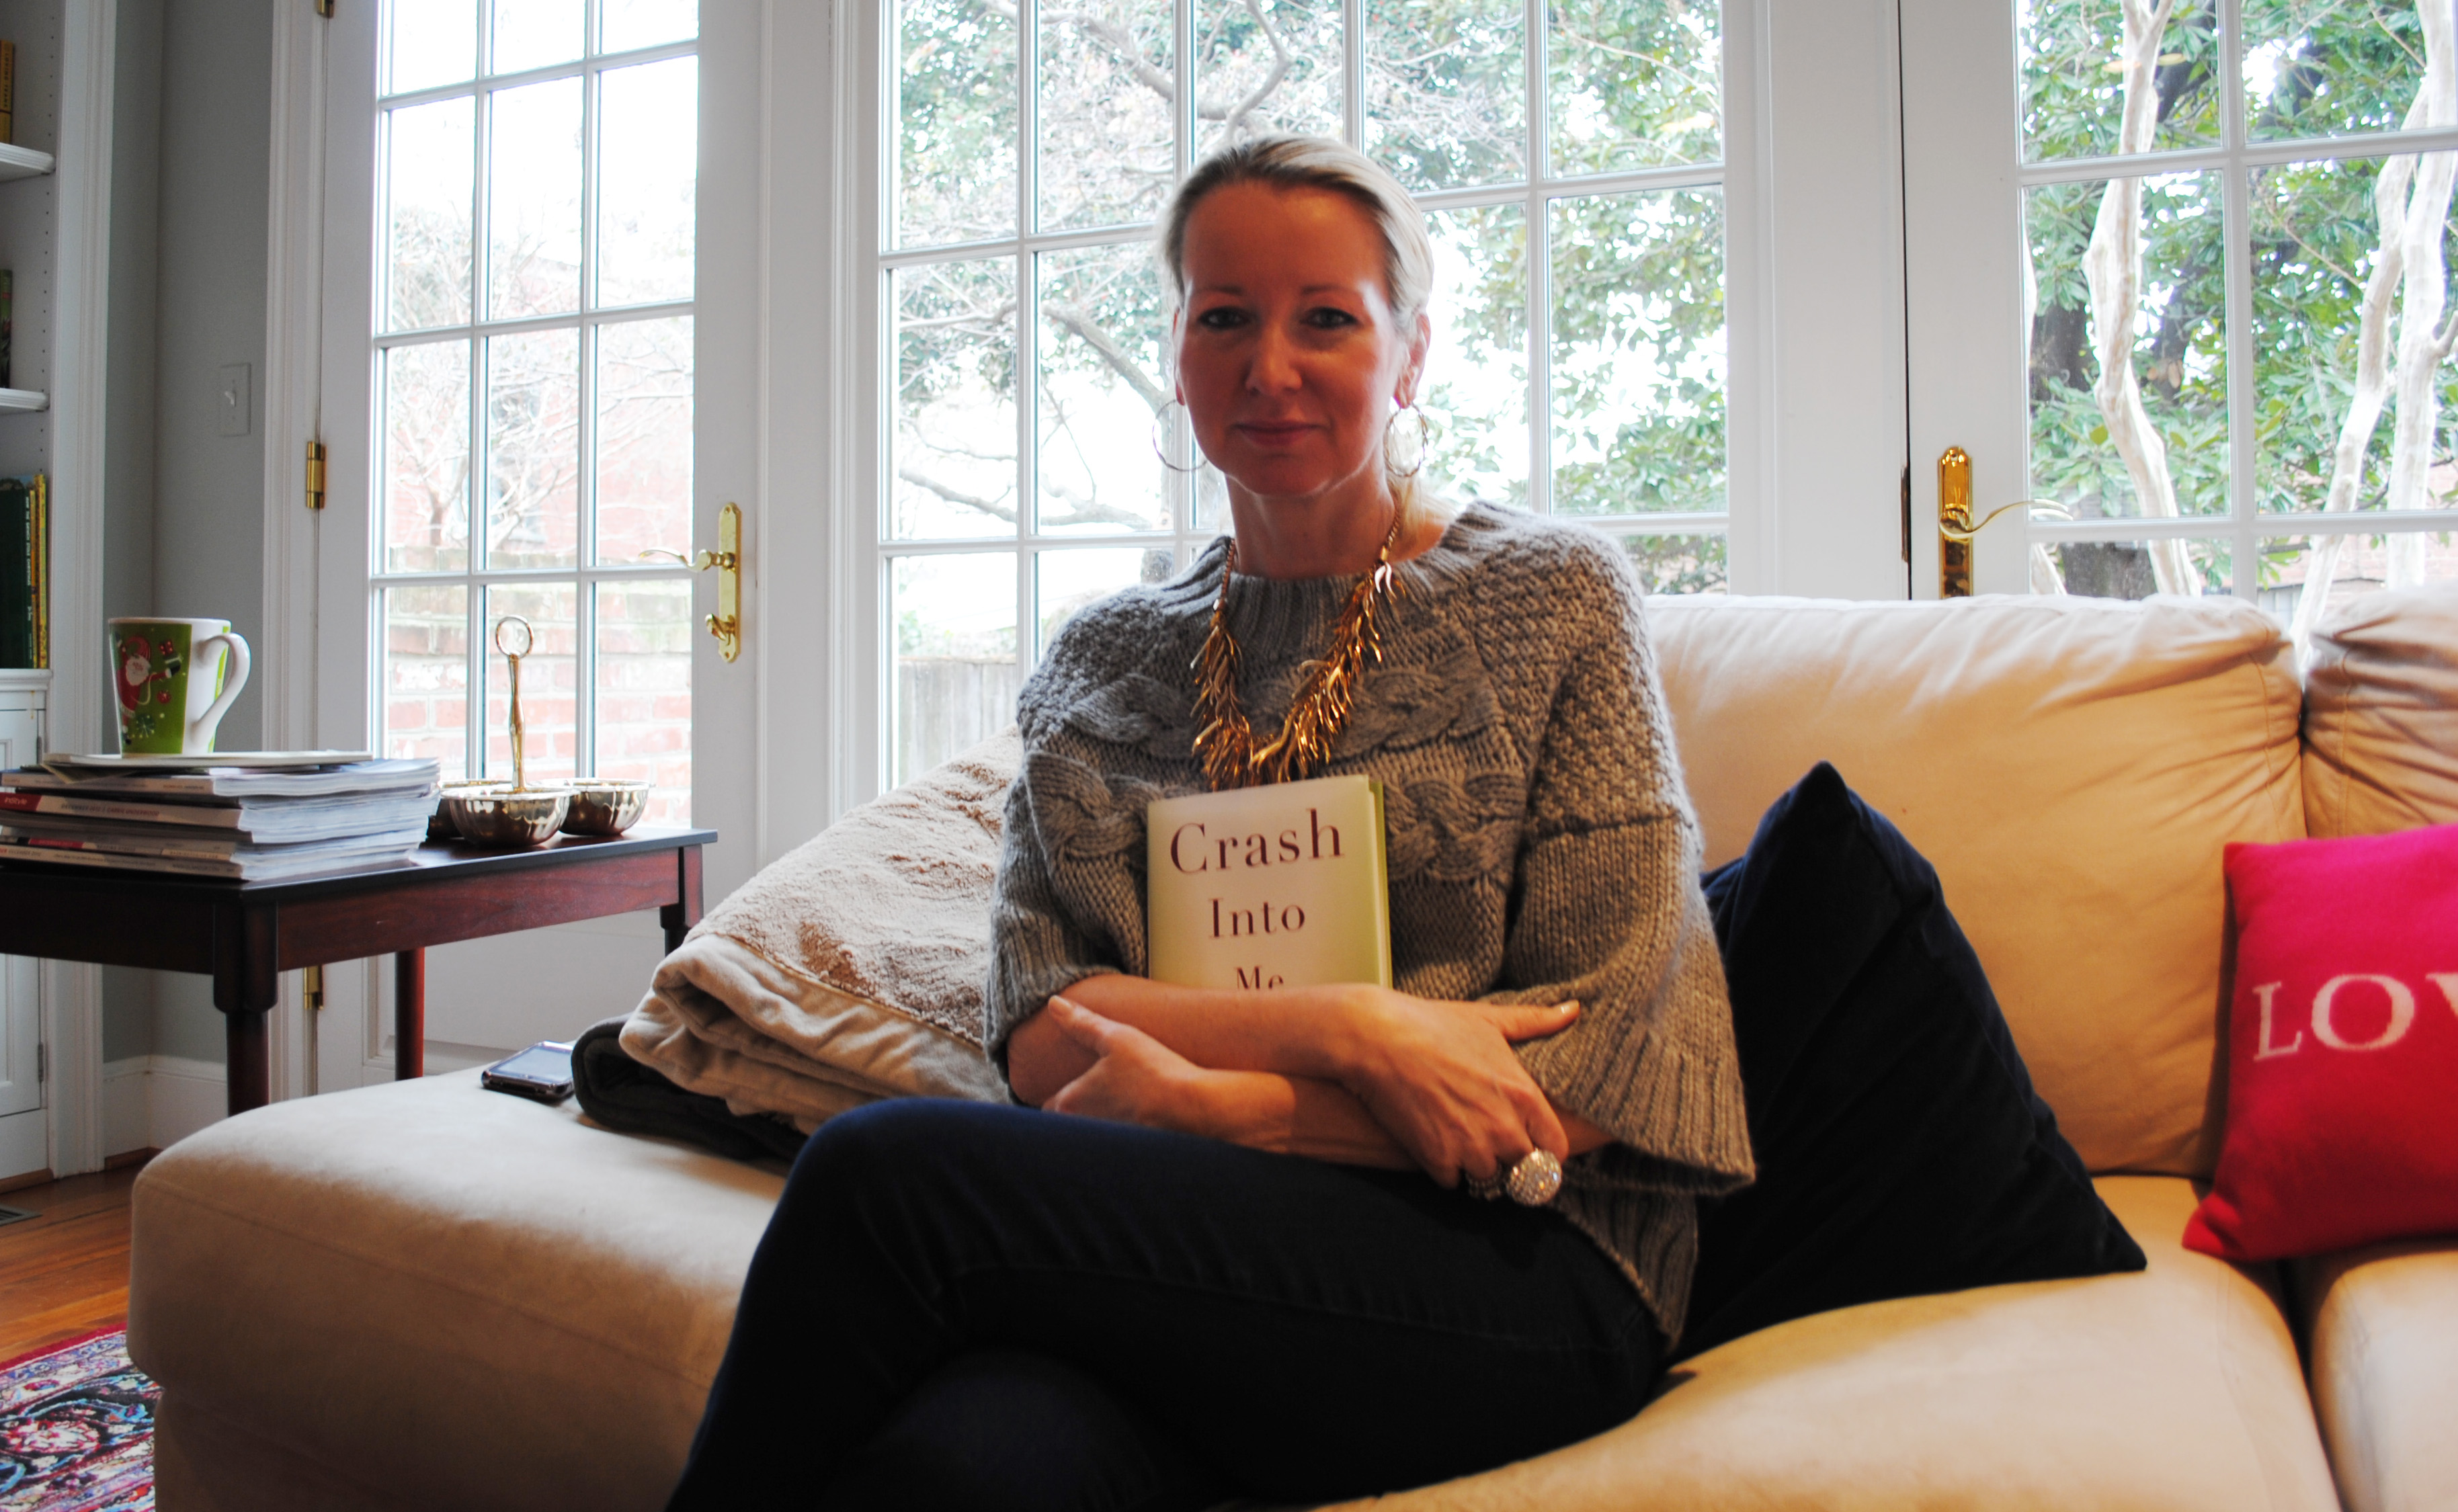 Paving a way for rape victims, Liz Seccuro writes book to inspire